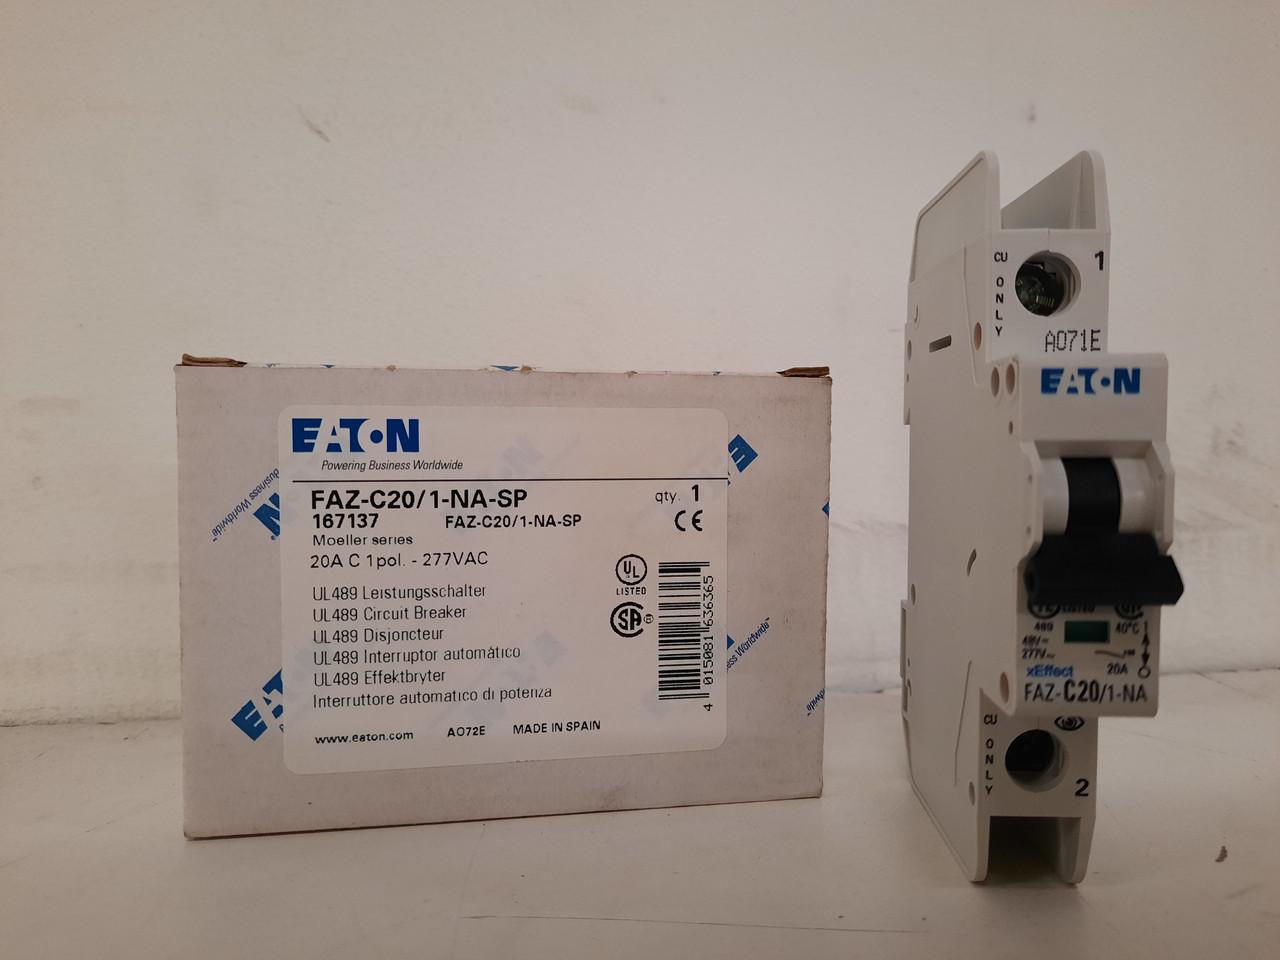 Eaton FAZ-C20/1-NA-SP Eaton FAZ branch protector,UL 489 Industrial miniature circuit breaker - supplementary protector,Single package,Medium levels of inrush current are expected,20 A,10 kAIC,Single-pole,277 V,5-10X /n,Q38,50-60 Hz,Screw terminals,C Curve